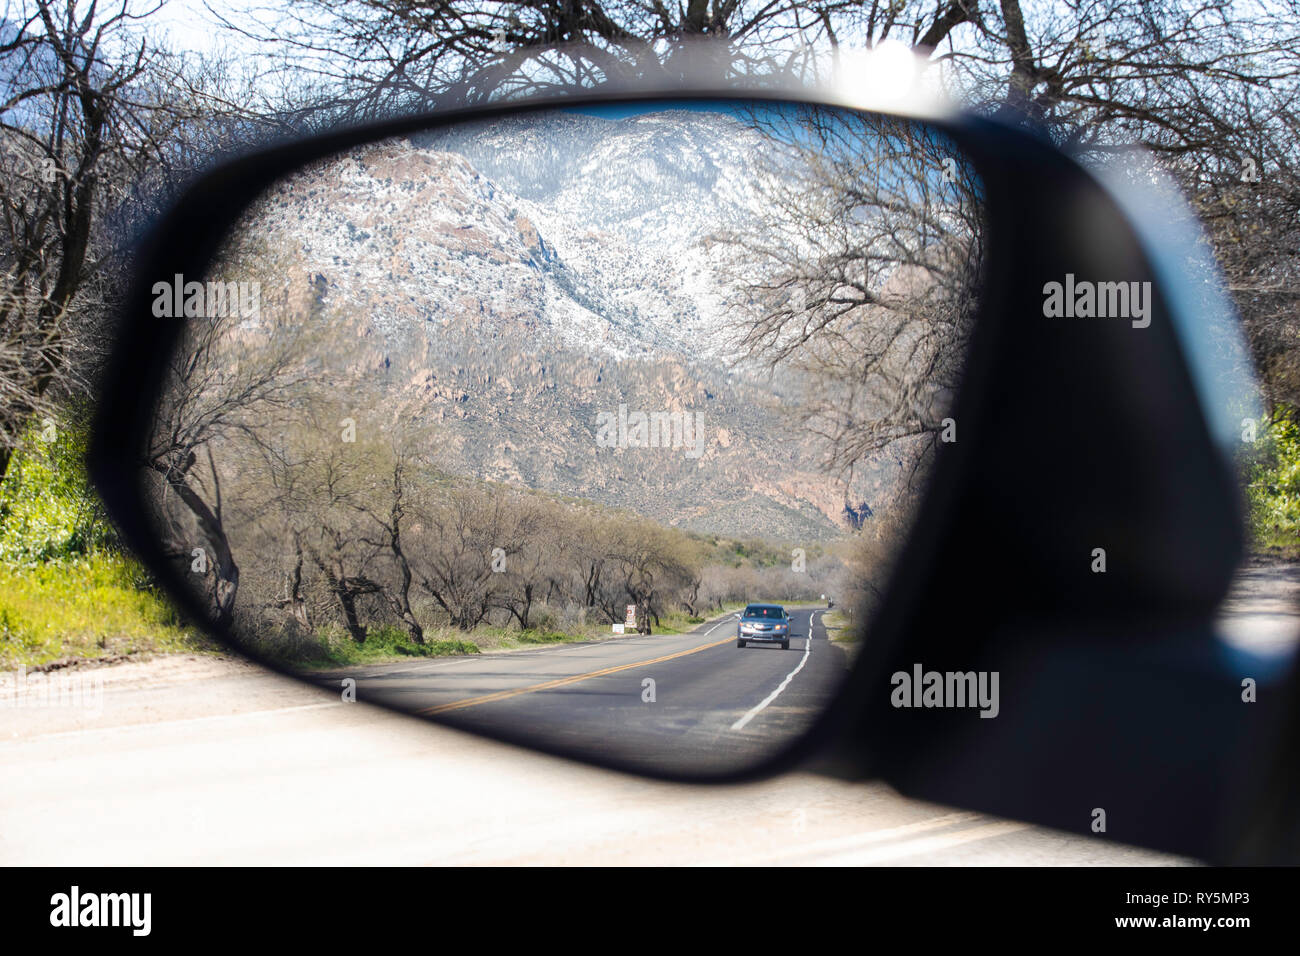 Scenic reflections in a side view mirror from inside a car. Catalina State Park, Tucson, Arizona Stock Photo